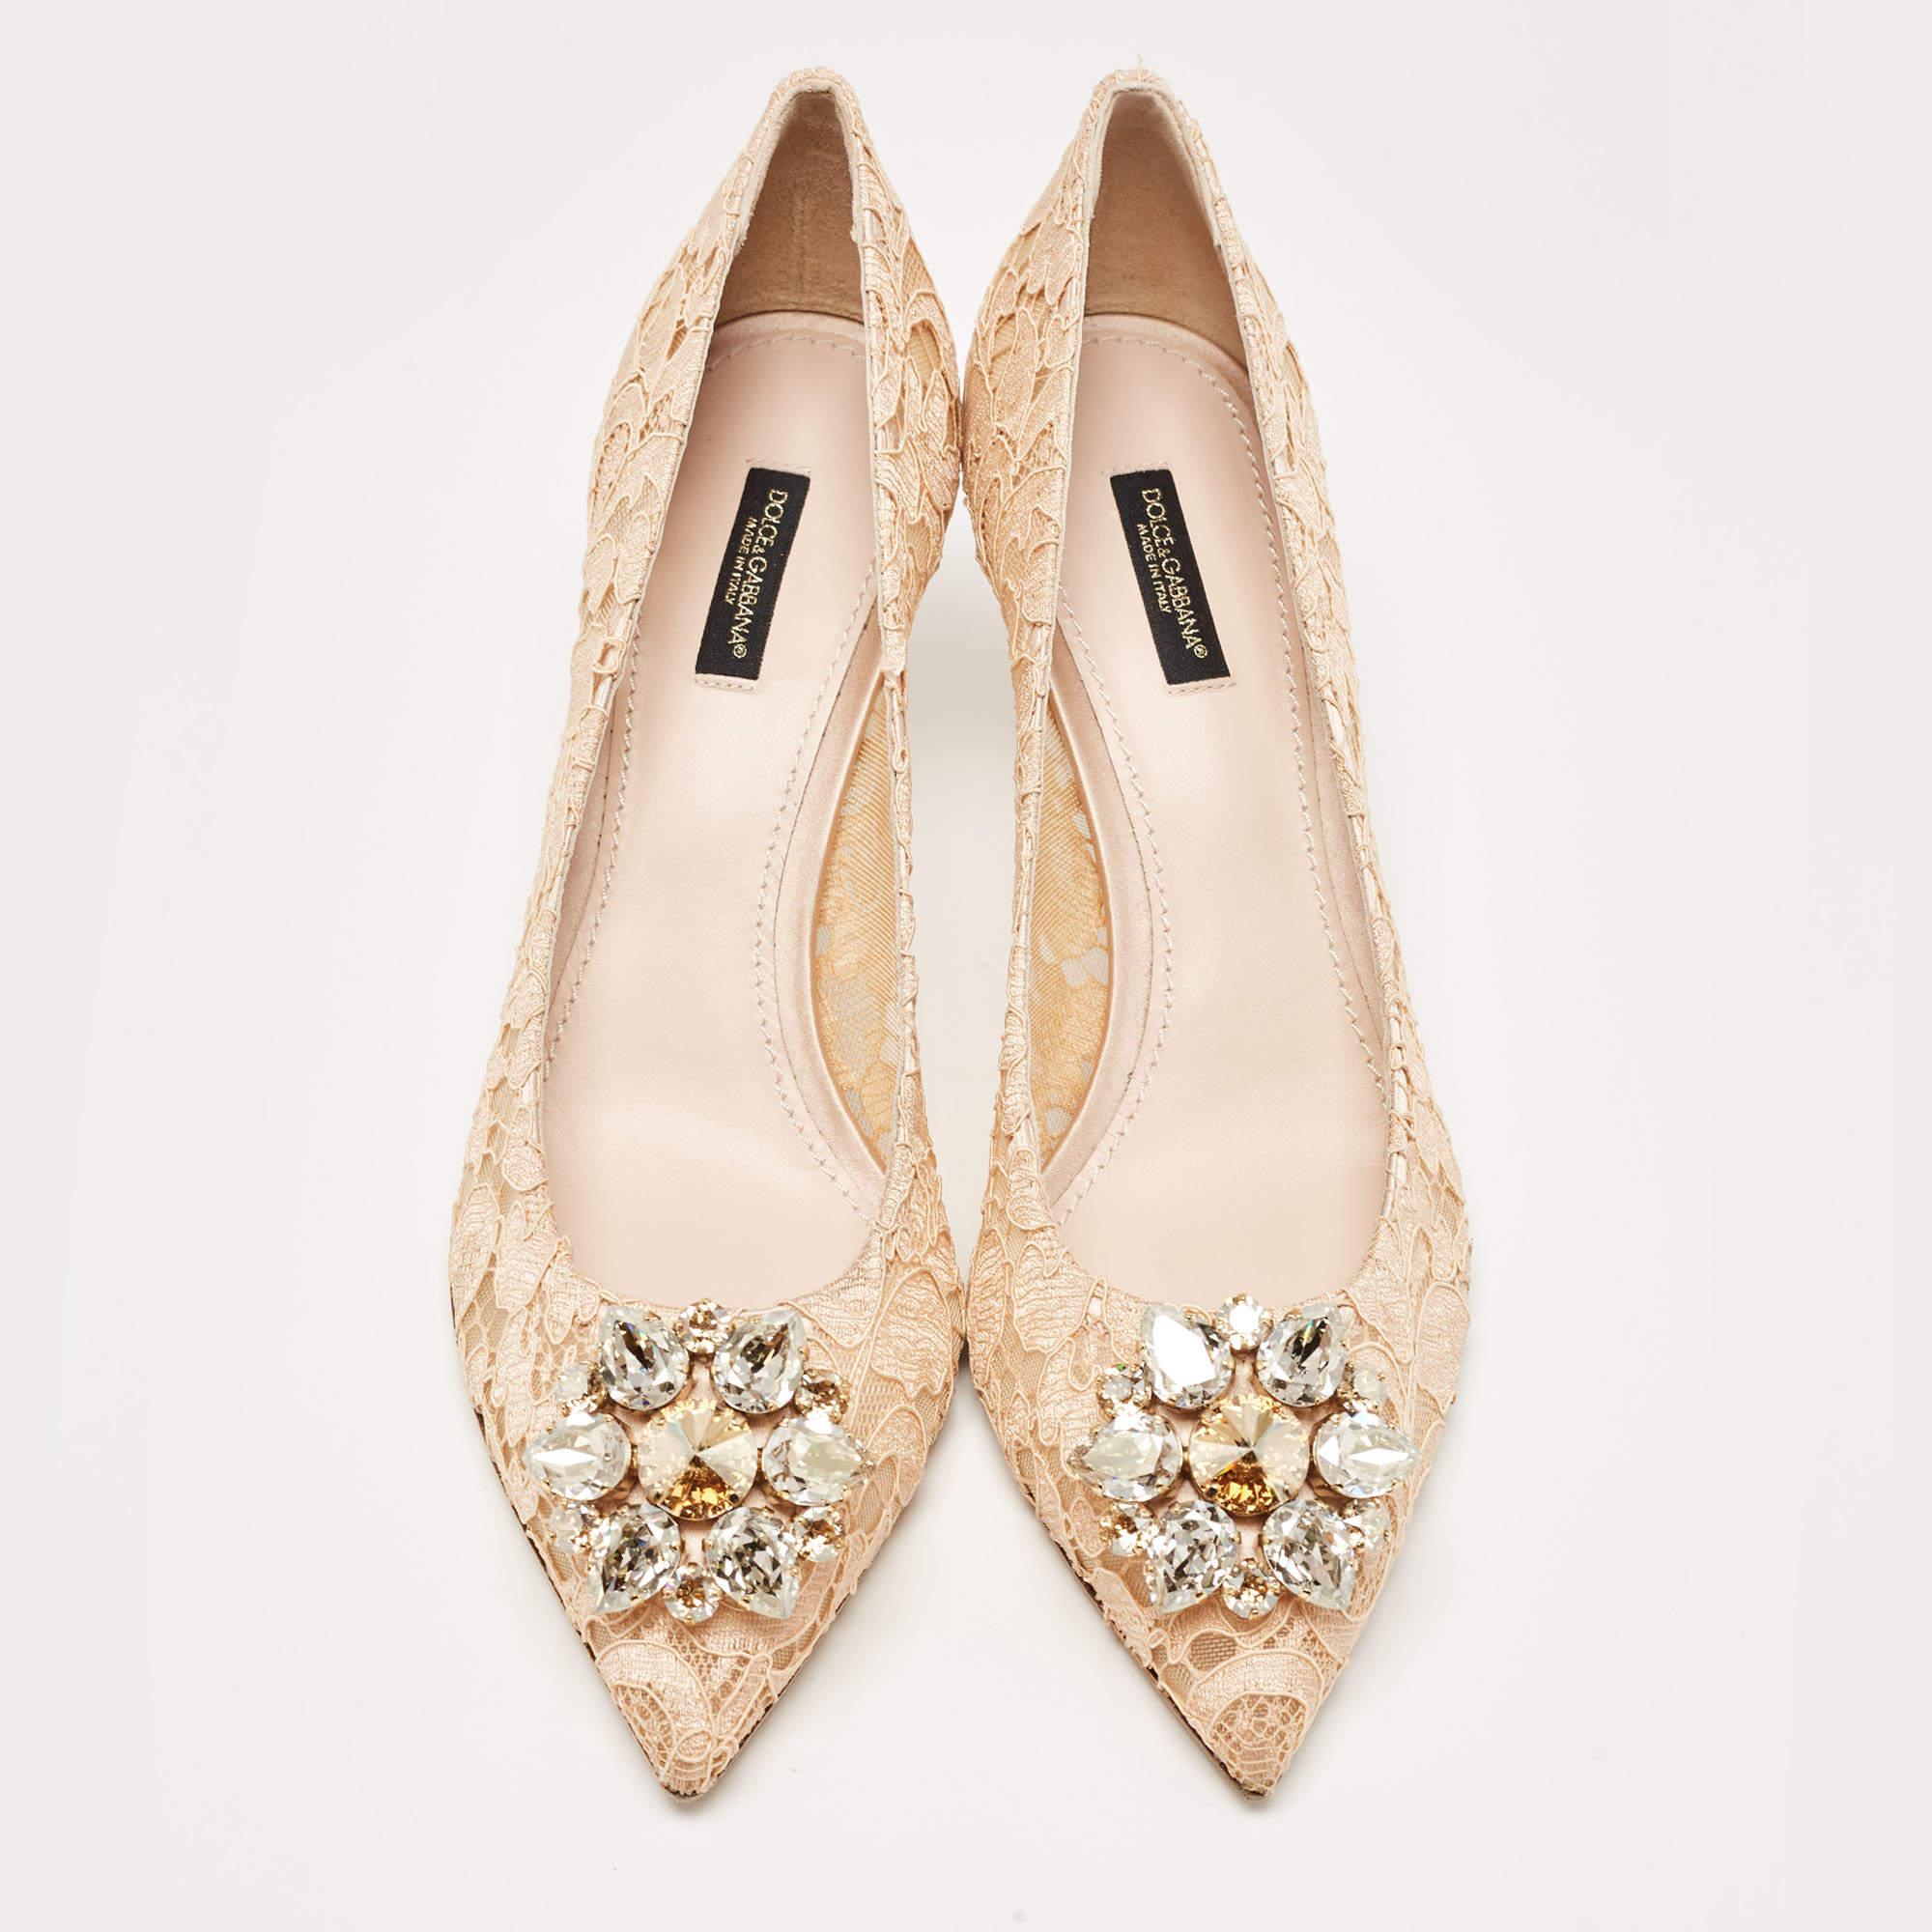 This pair of Dolce & Gabbana is intricately designed with lace and makes for a captivating creation. In a pleasing peach shade, a beautiful crystal embellishment sits atop its toes, and its 7.5cm heels will add grace to every step.

